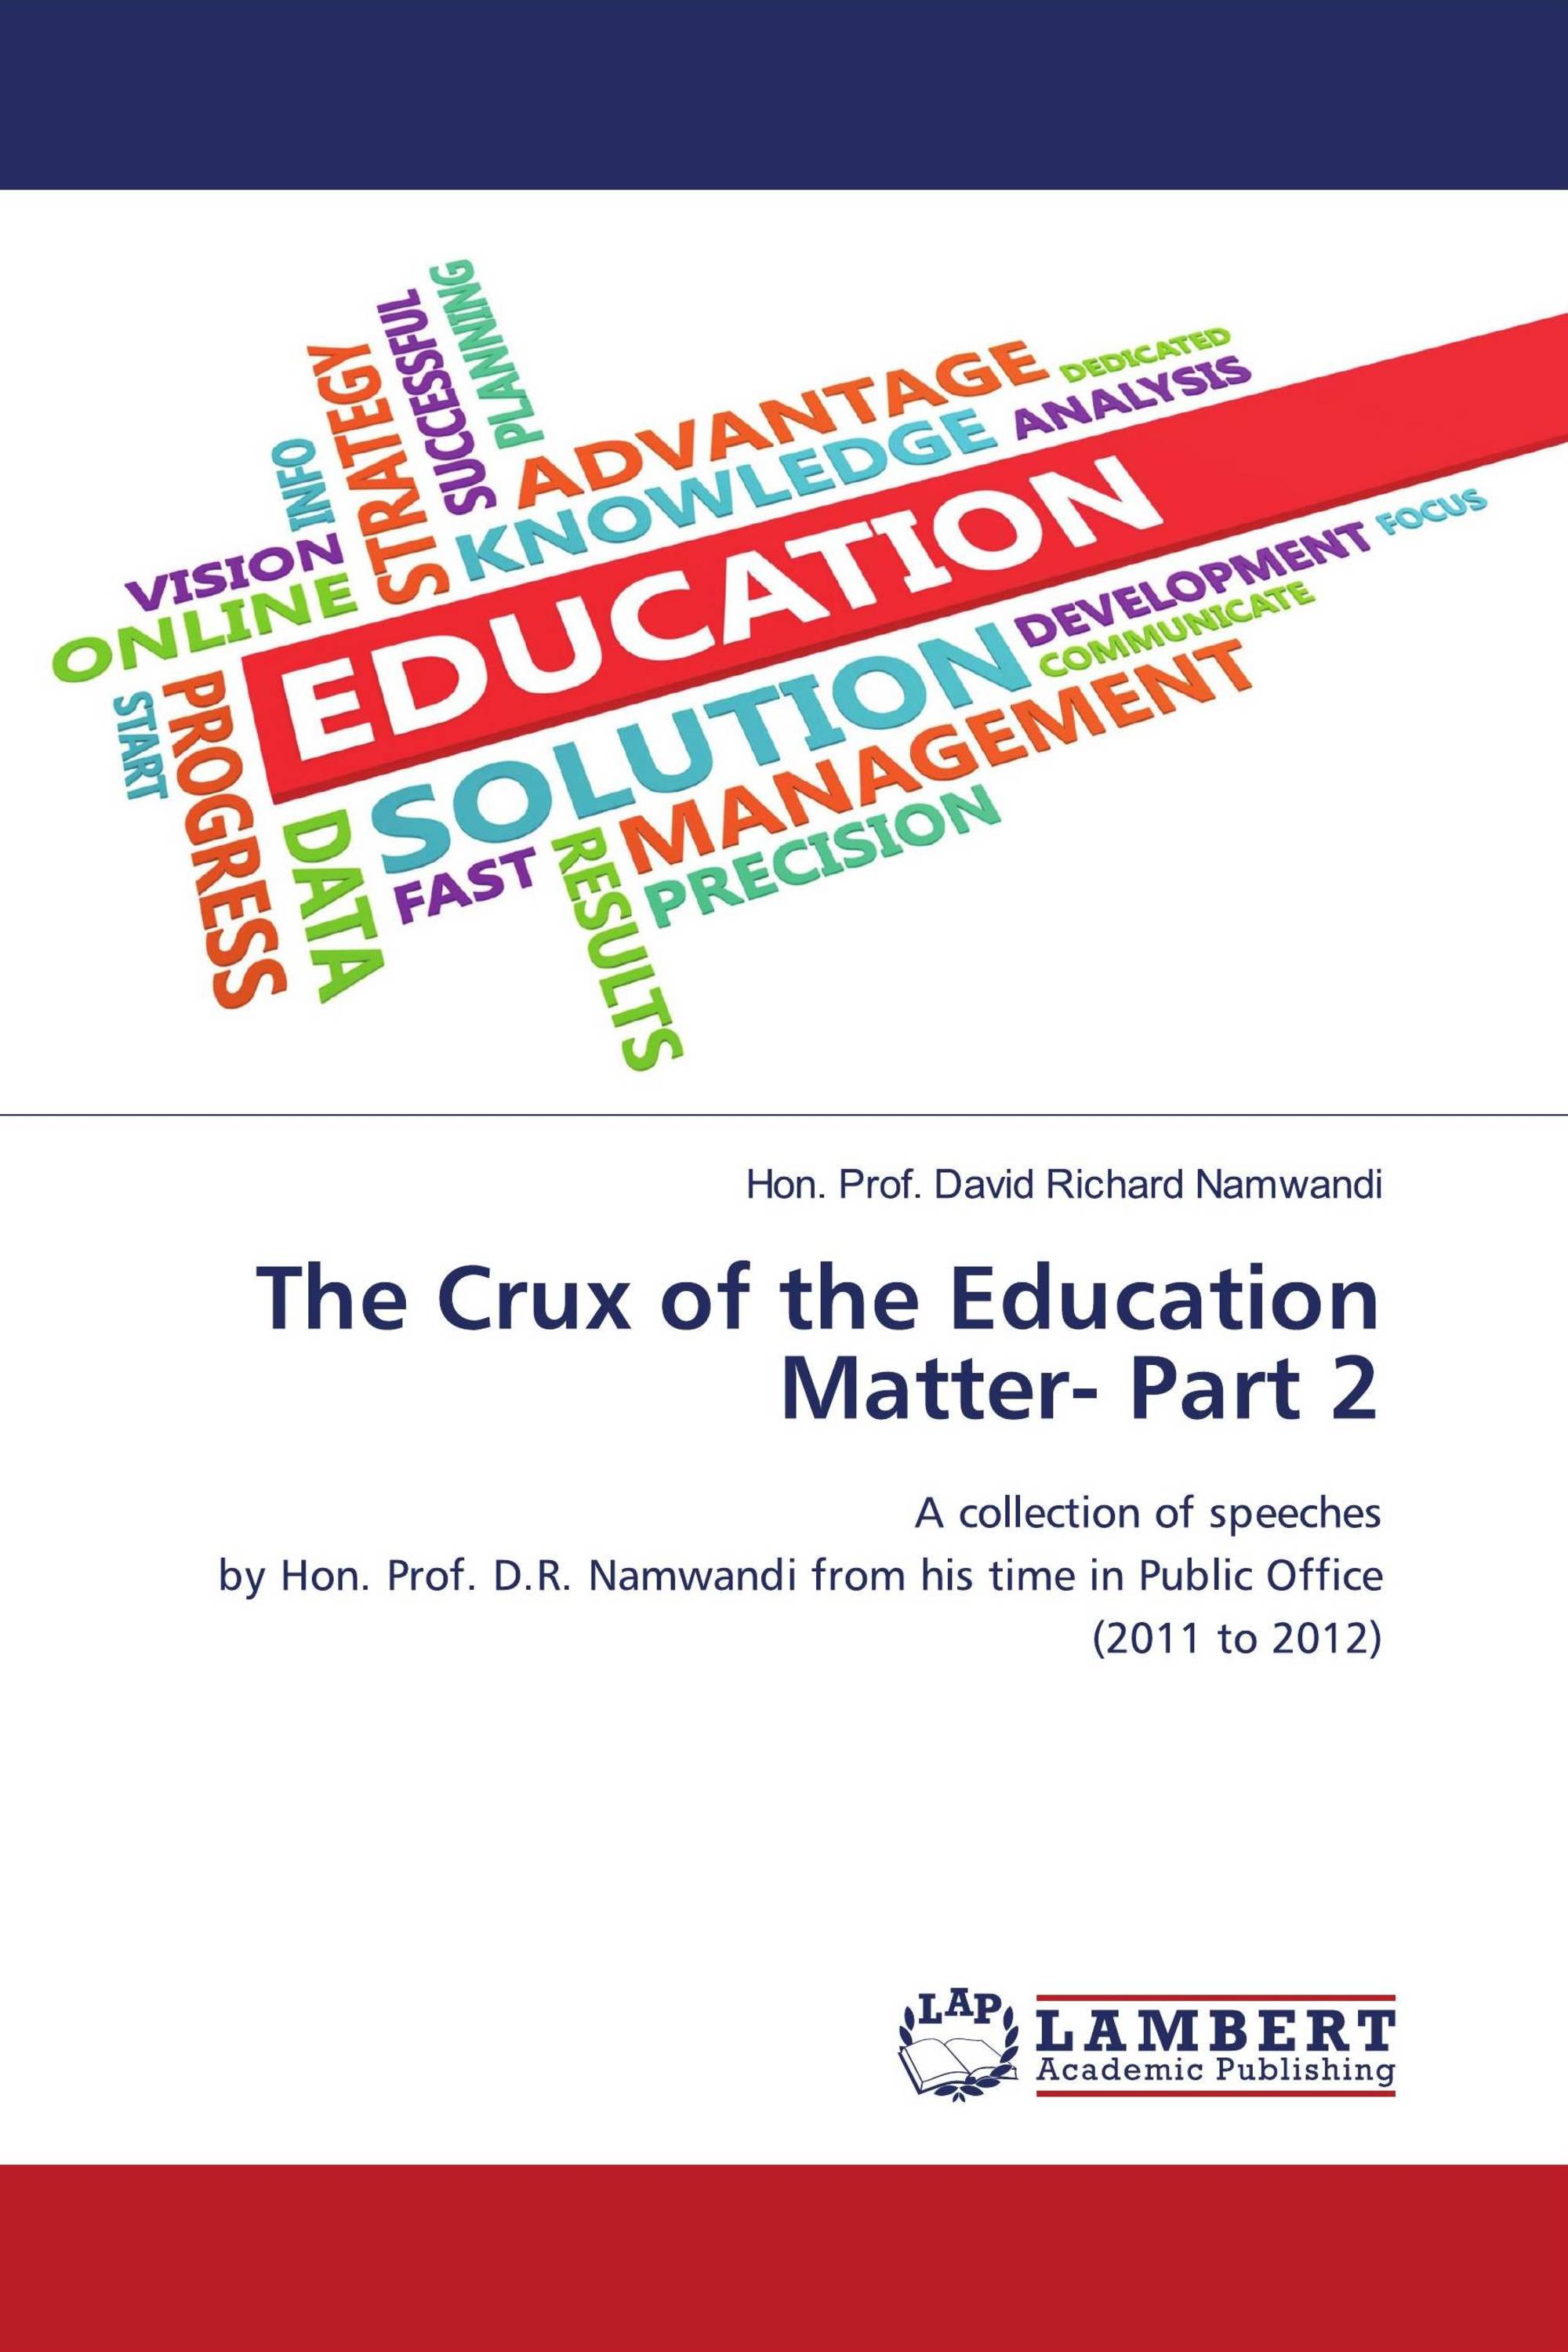 The crux of the education matter- Part 2